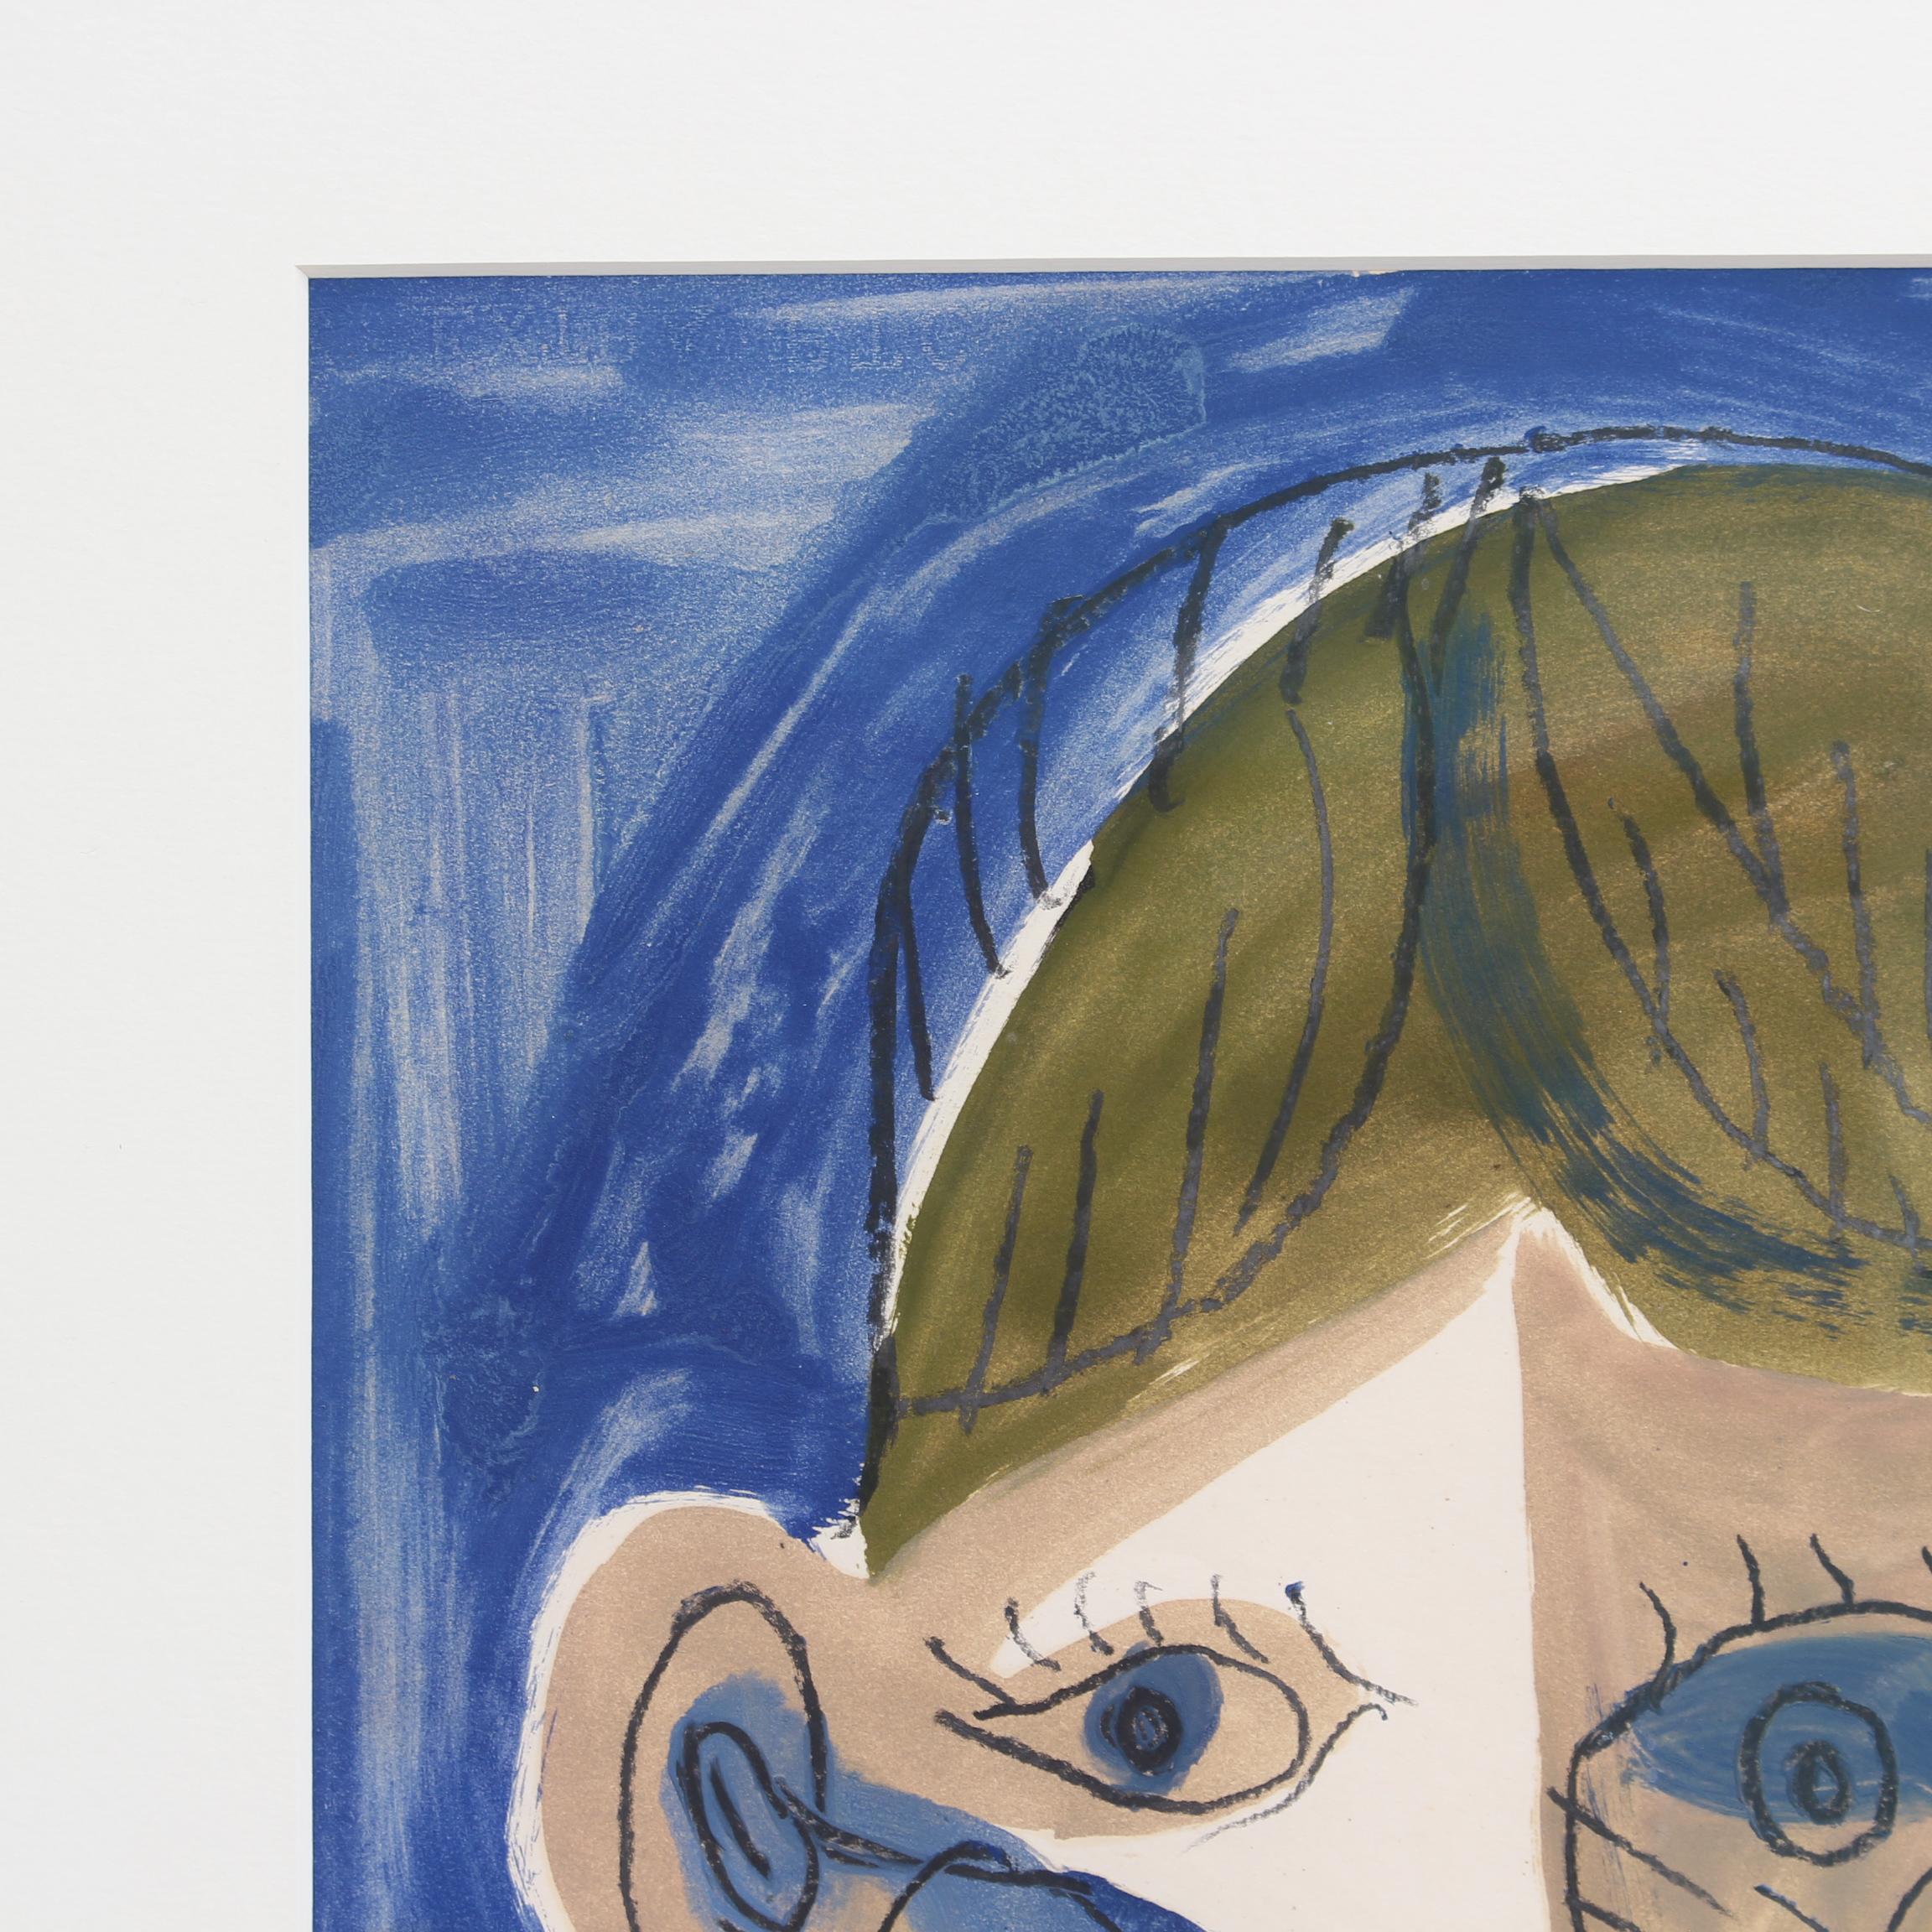 'Portrait of Boy in Blue', gouache on art paper, by Raymond Debiève (circa 1960s). Here the artist paints a young boy, very possibly his son, Vincent. In Debiève's artistic style, Picasso's influence is undeniable yet his own naive post-cubist